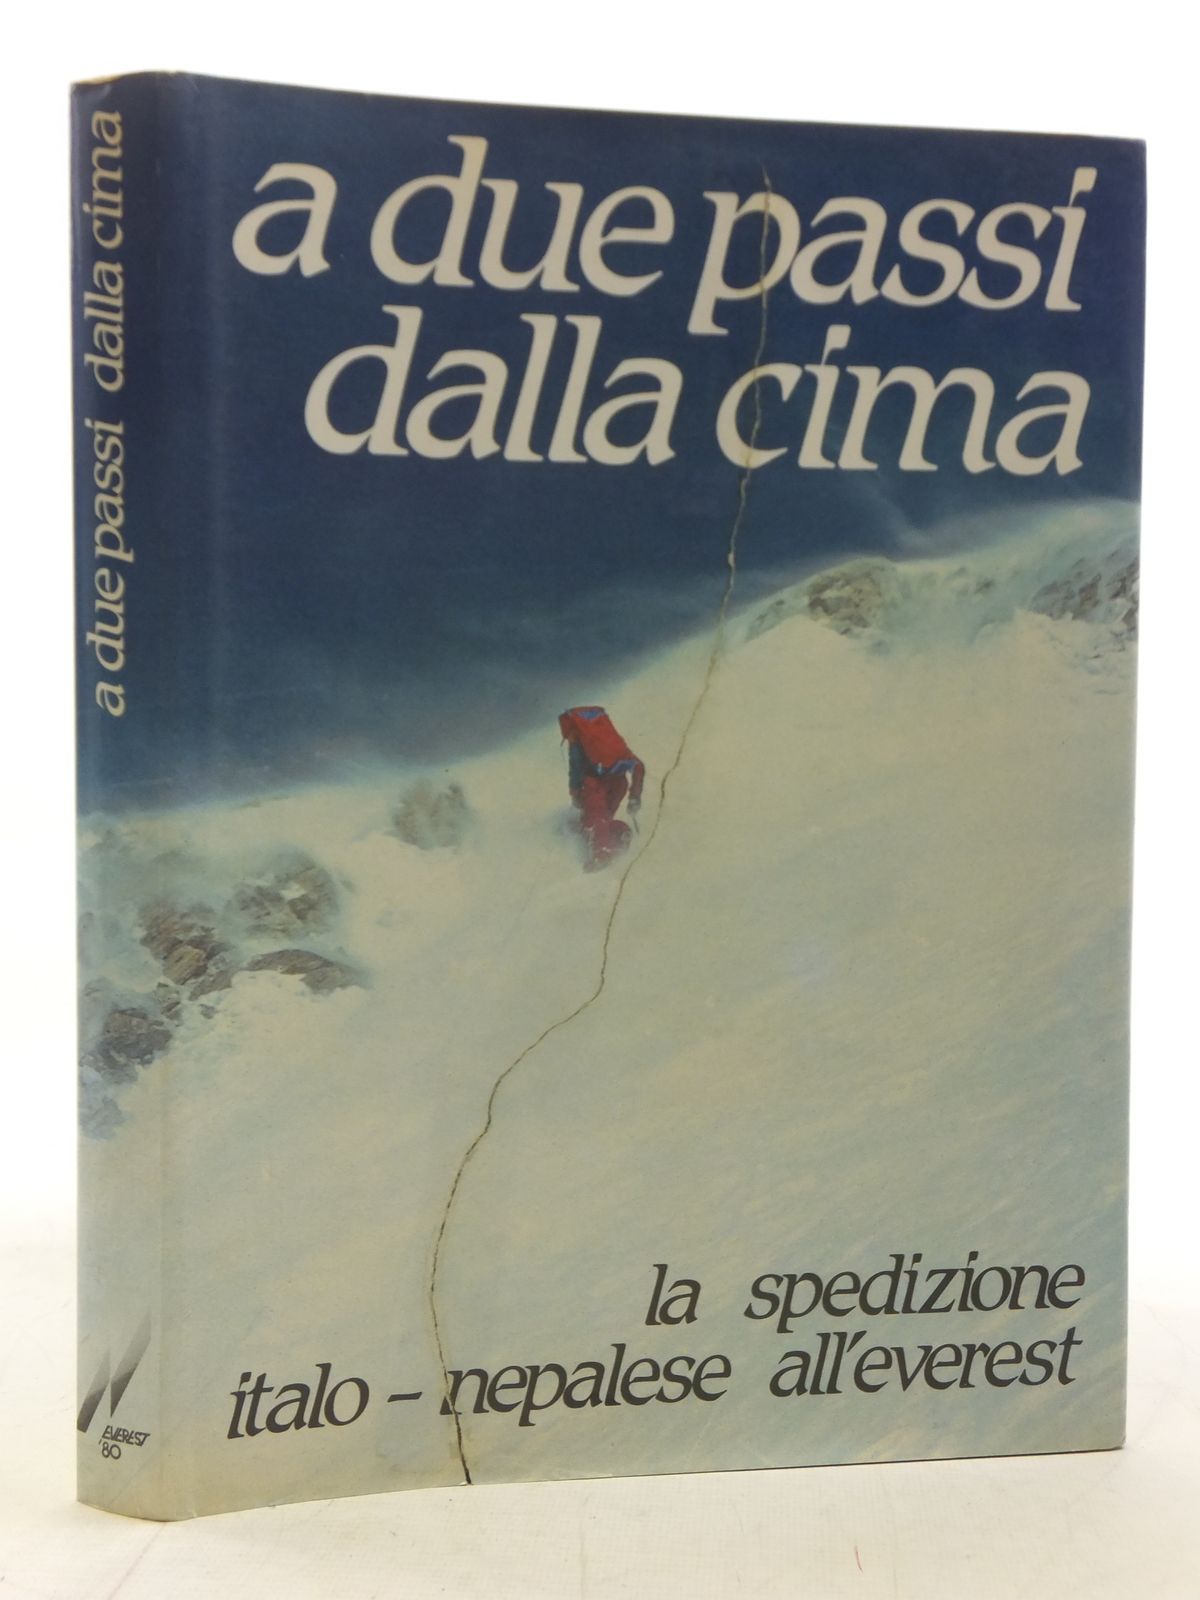 Photo of A DUE PASSI DALLA CIMA written by Favaro, Adriano published by Everest 80 (STOCK CODE: 1606234)  for sale by Stella & Rose's Books